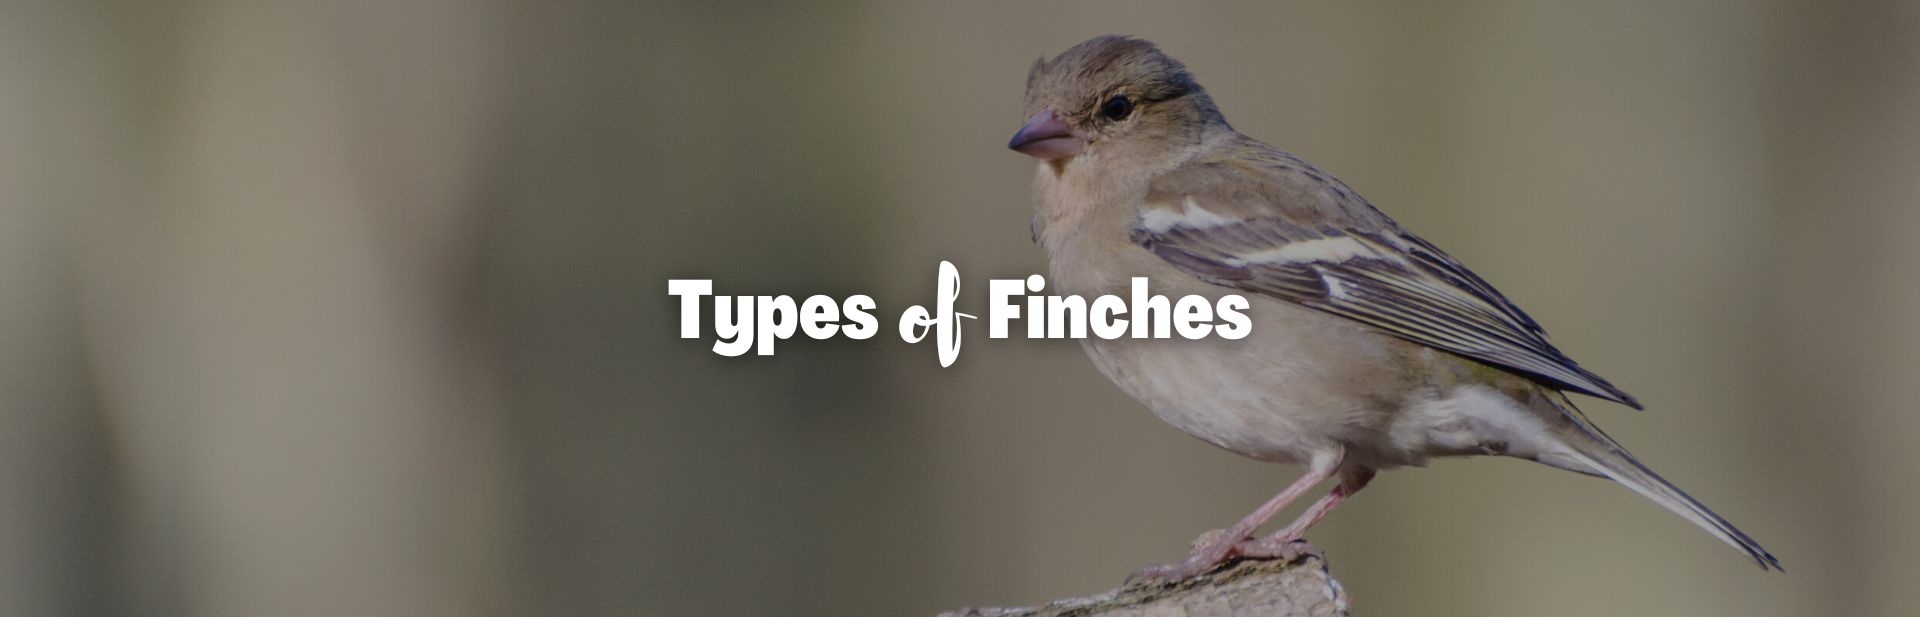 25 Remarkable Types of Finches (With Photos and Songs)